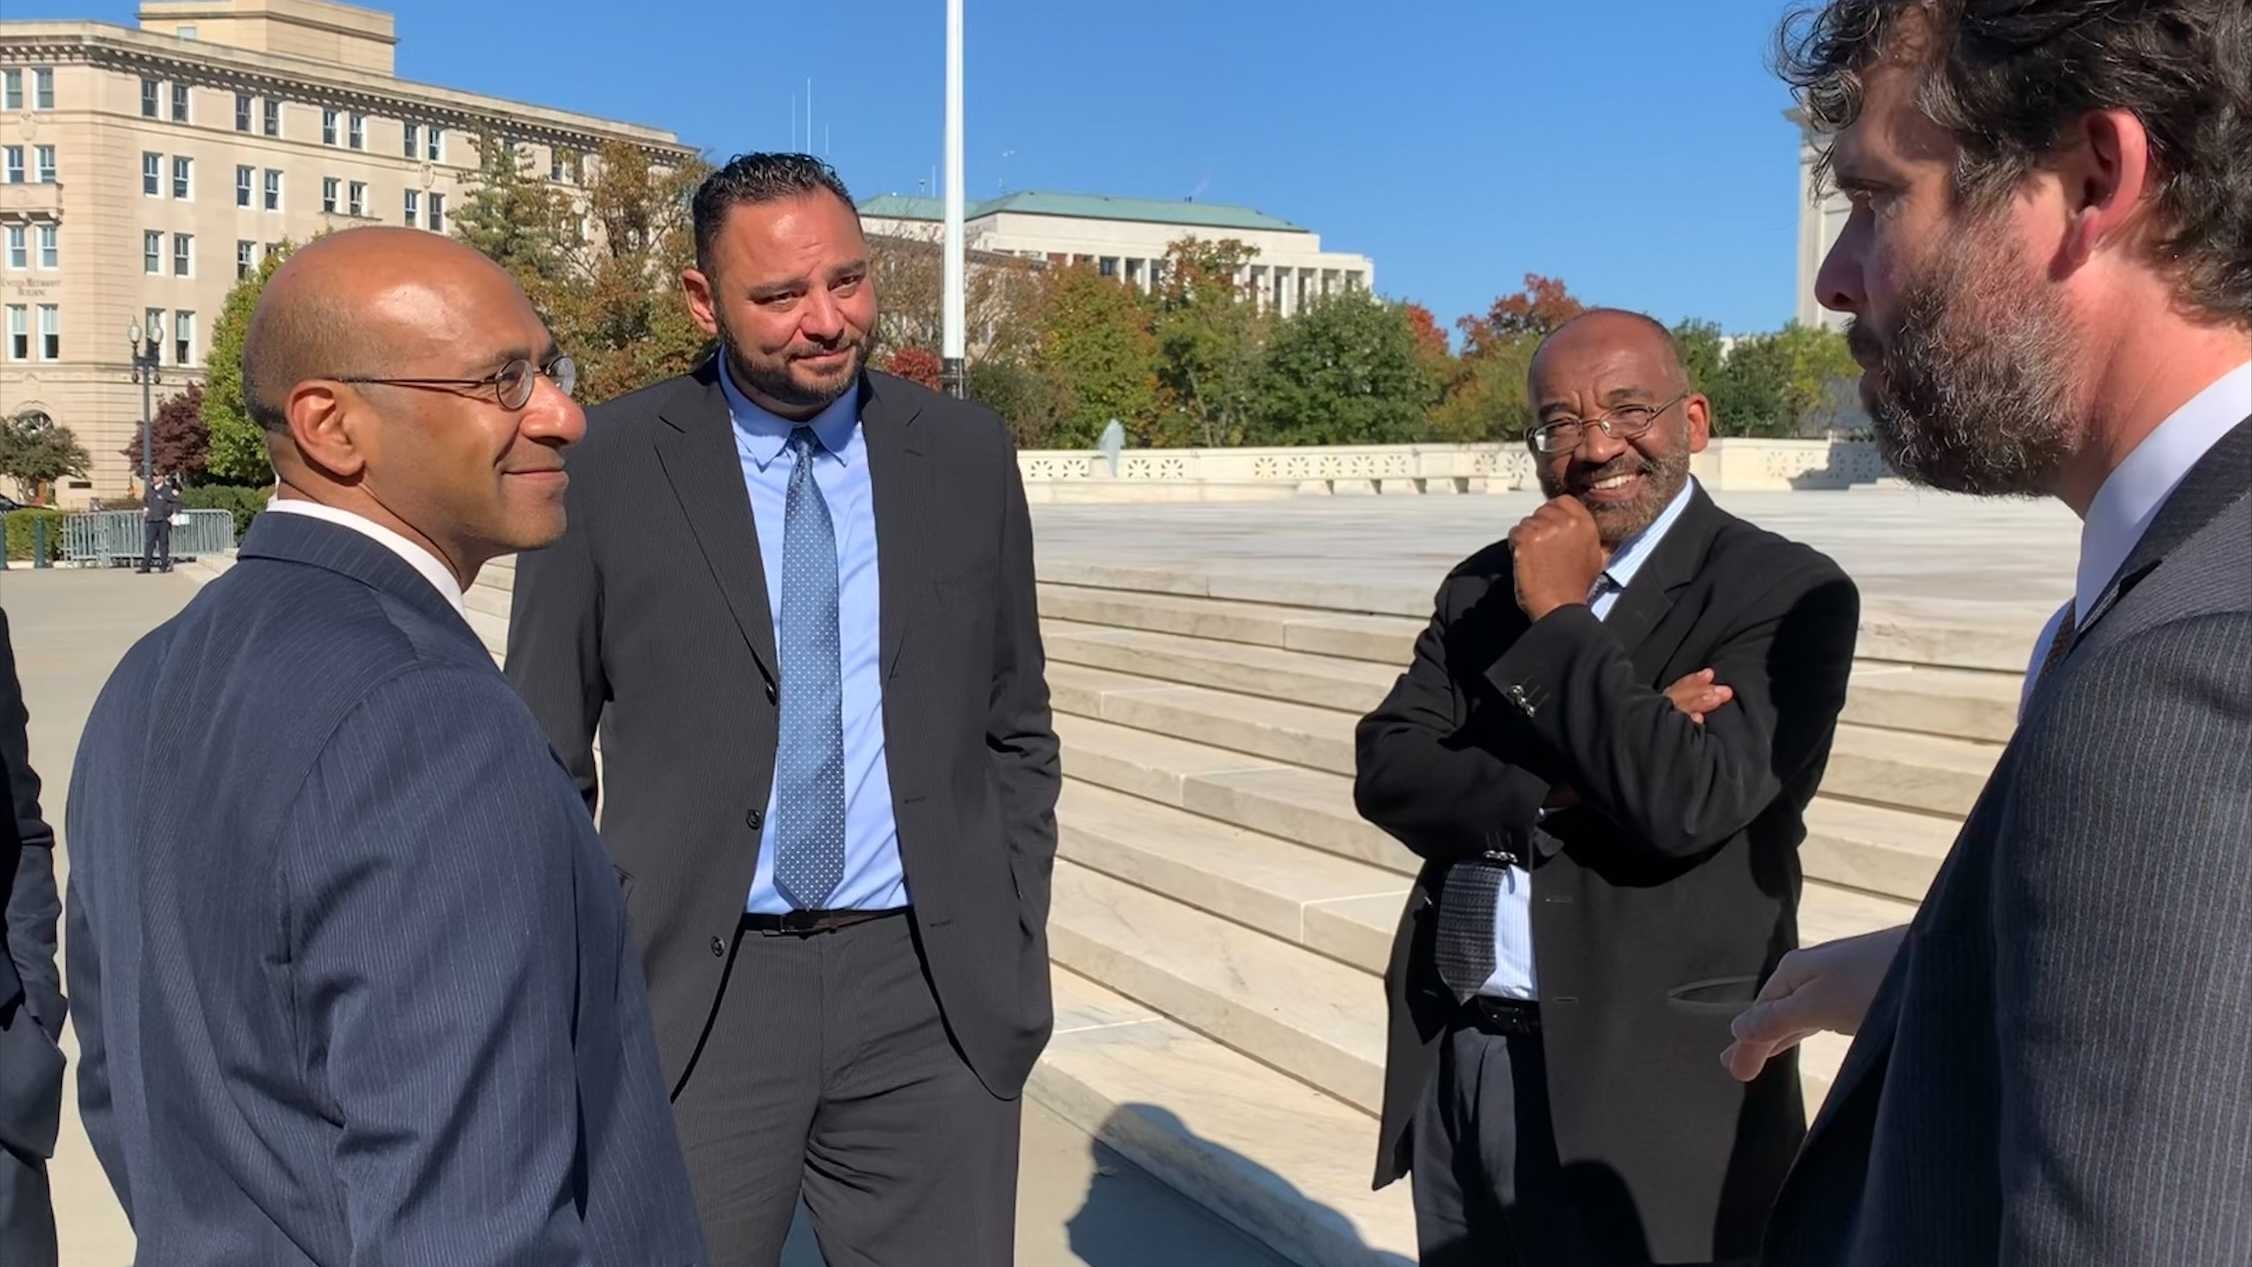 Yasser Abdelrahim (2nd from left) and Yassir Fazaga (3rd from left) stand outside the Supreme Court with their lawyers after oral arguments on 8 November 2021.